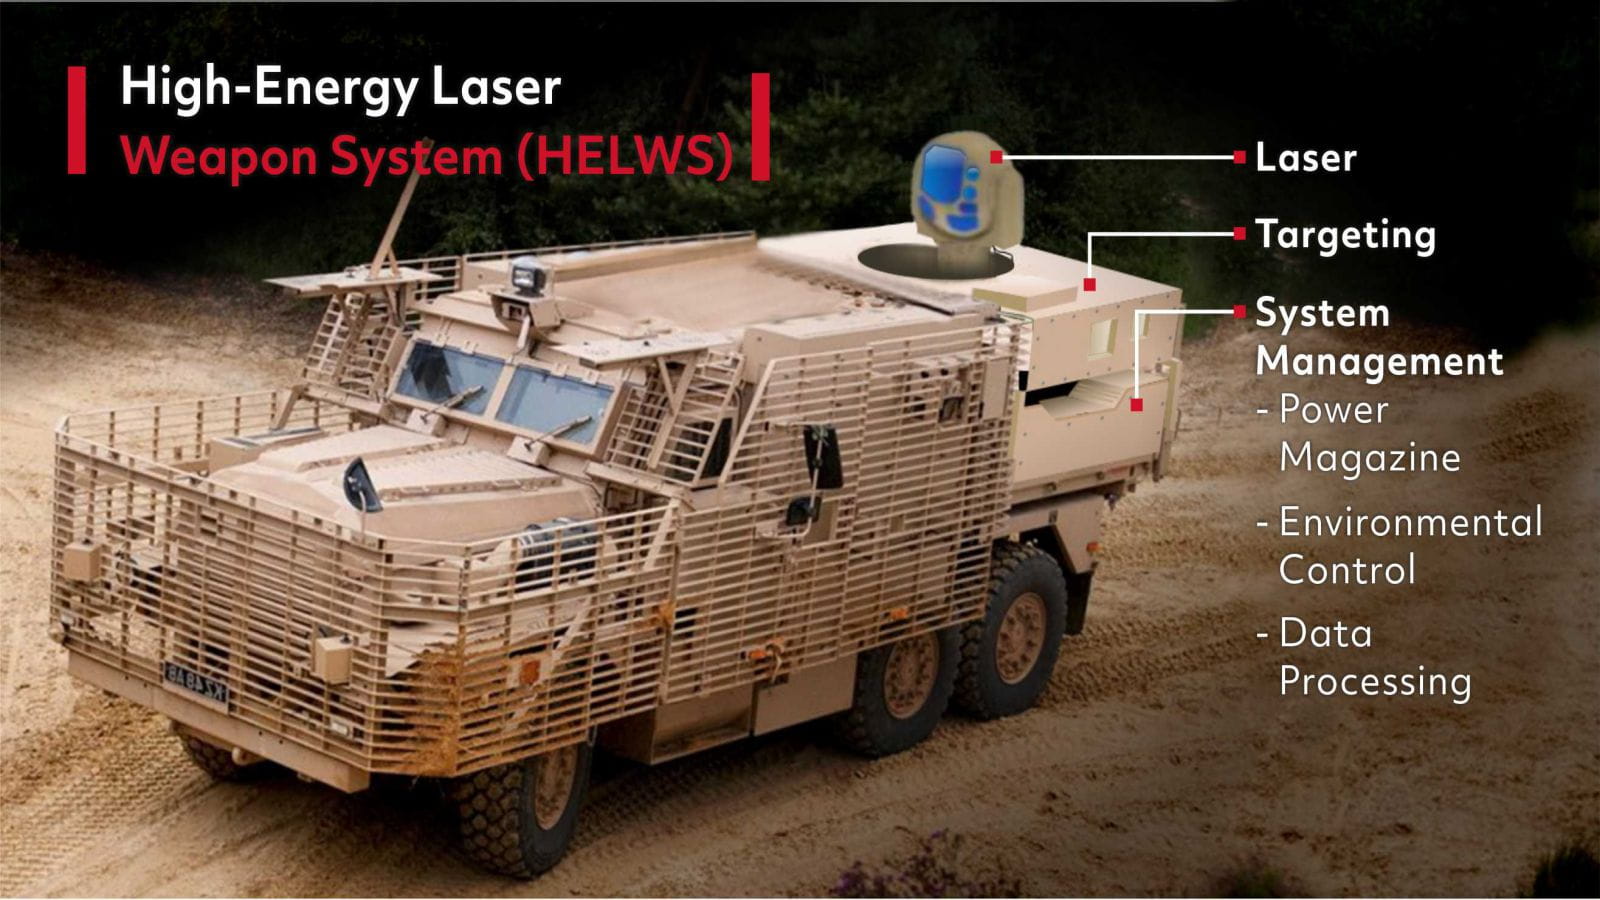 raytheon-uk-bring-counter-drone-high-energy-laser-technology-uk-ministry-defence